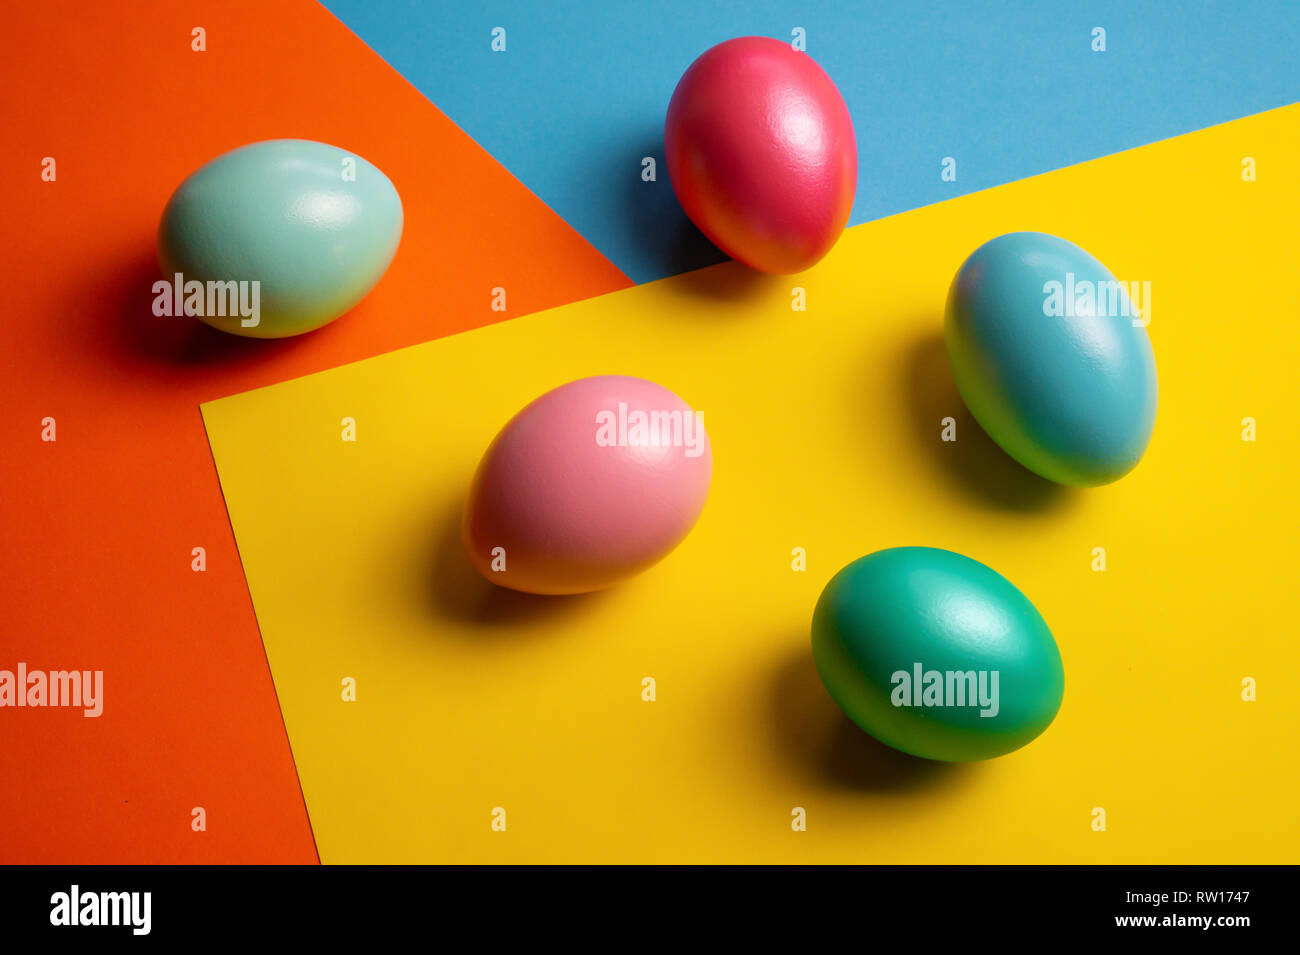 Colorful shiny easter eggs on color block background Stock Photo